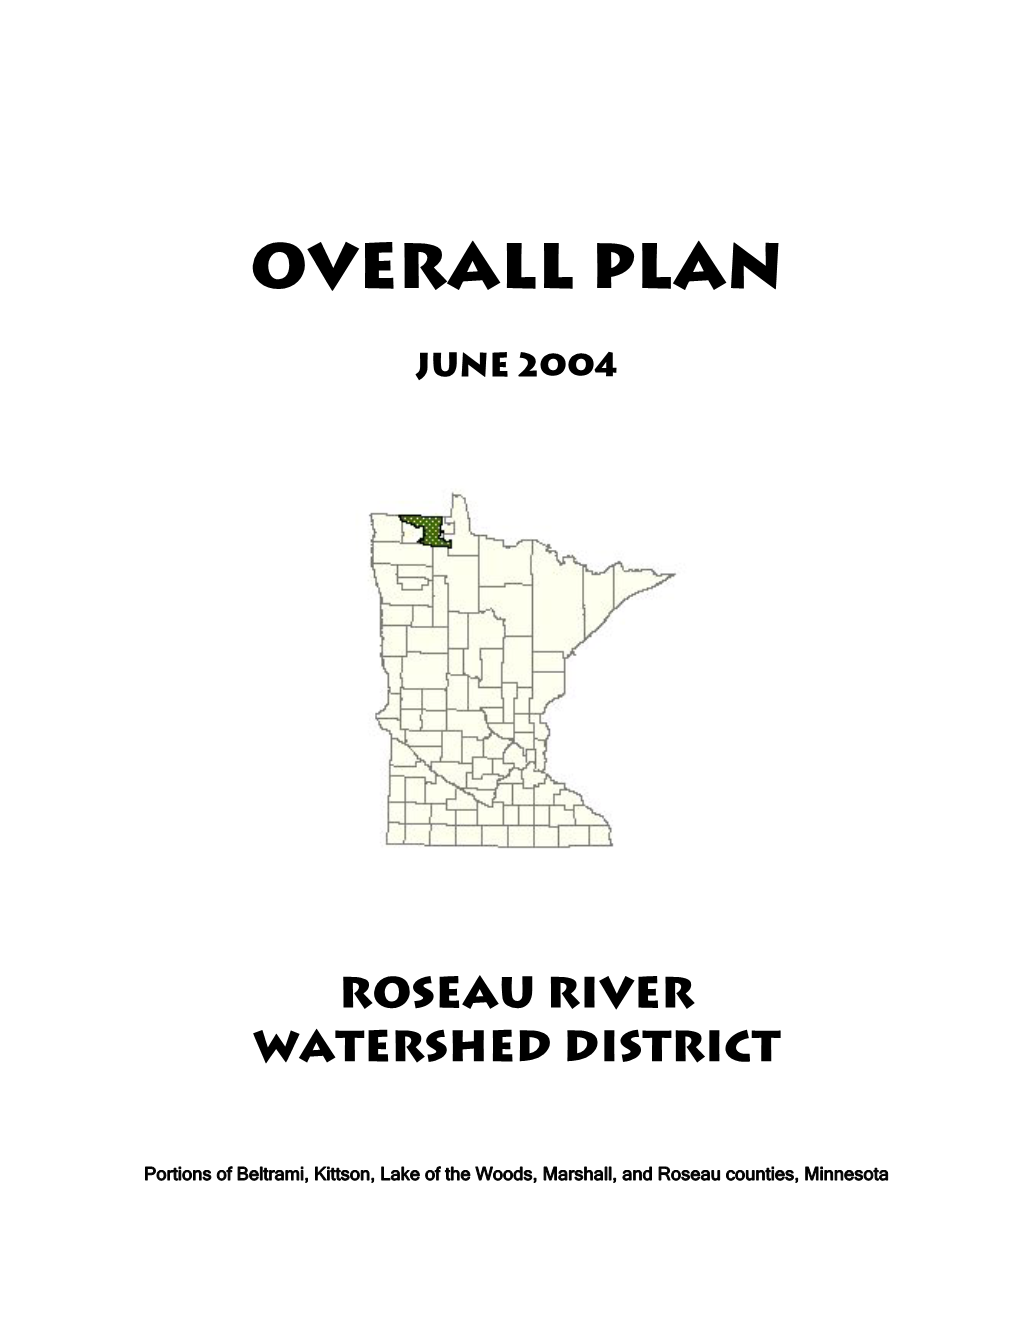 Roseau River Watershed District's (RRWD) Overall Plan